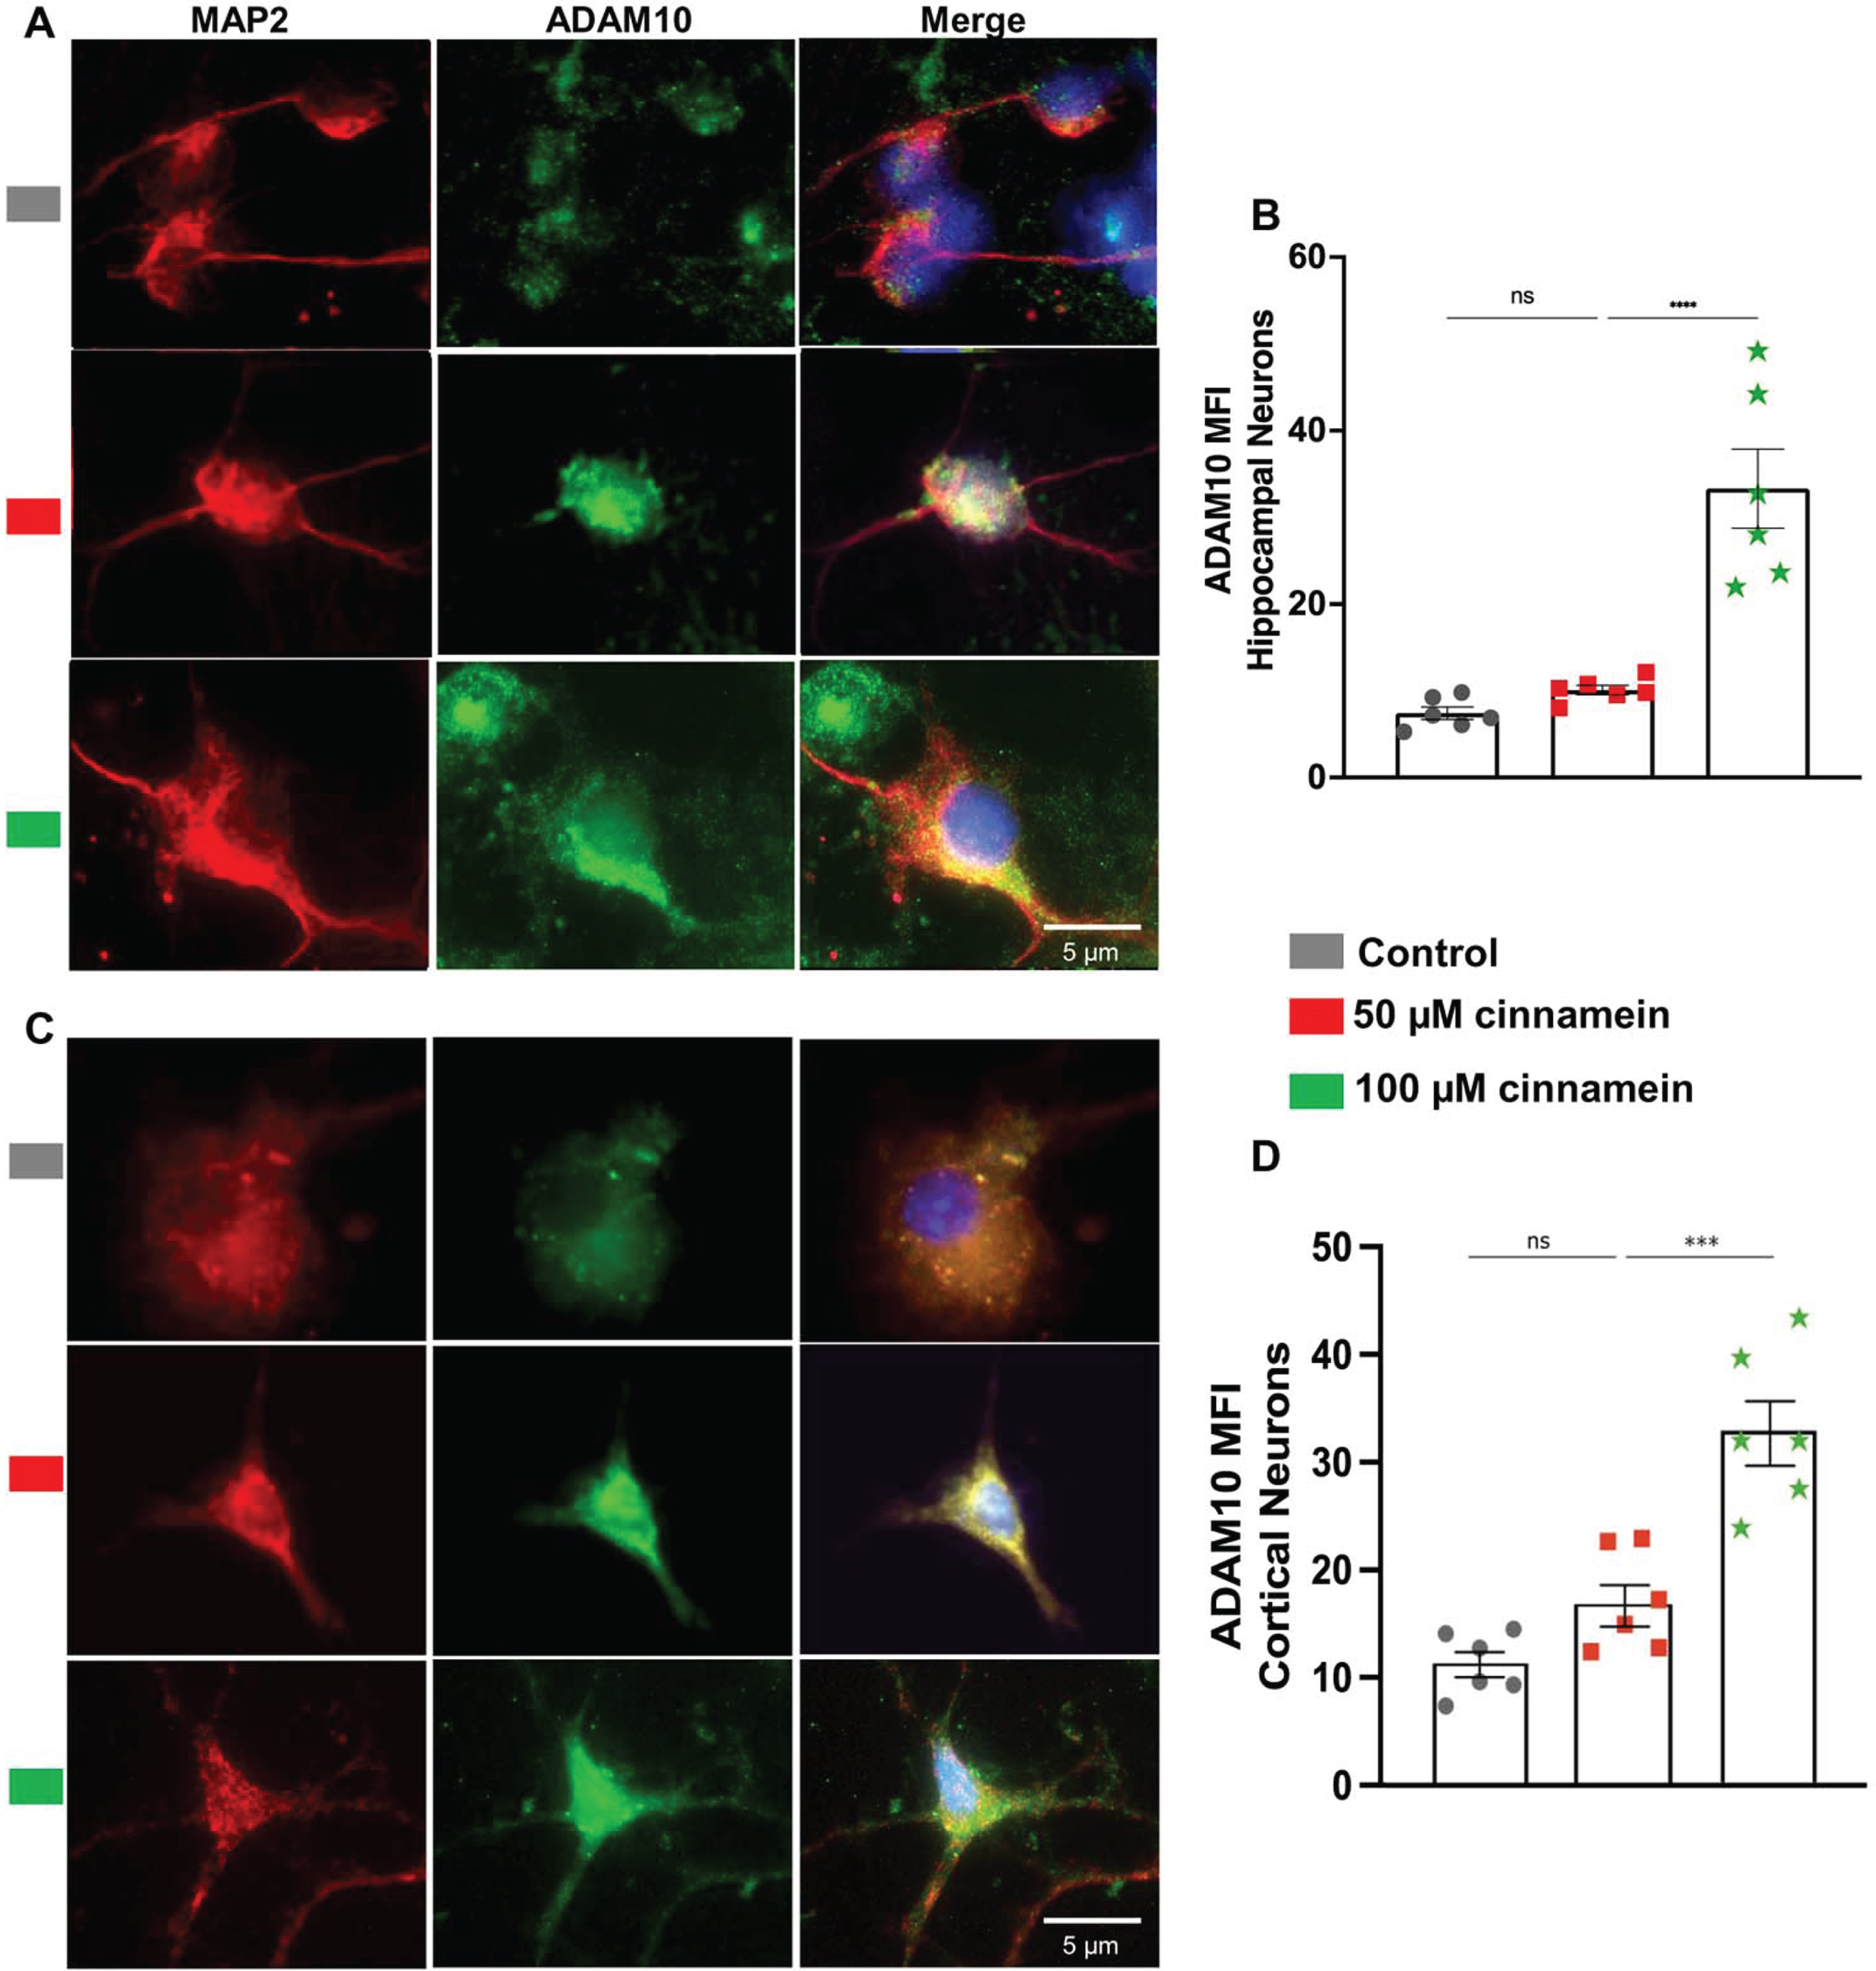 Cinnamein increases the expression of ADAM10 in primary mouse hippocampal and cortical neurons. Hippocampal (A) and cortical (C) neurons isolated from E18 non-transgenic mouse fetus were treated with 50 and 100 μM cinnamein for 18 hours followed by double-labeling of MAP2 and ADAM10. Mean fluorescence intensity (MFI) of ADAM10 was quantified in six hippocampal neurons (C) and cortical neurons (D) from three different experiments. All data, analyzed with Prism, represent the mean±SEM. One-way ANOVA followed by Šìdák’s multiple comparisons test was used for statistical analysis. ***p < 0.001; ns, not significant.